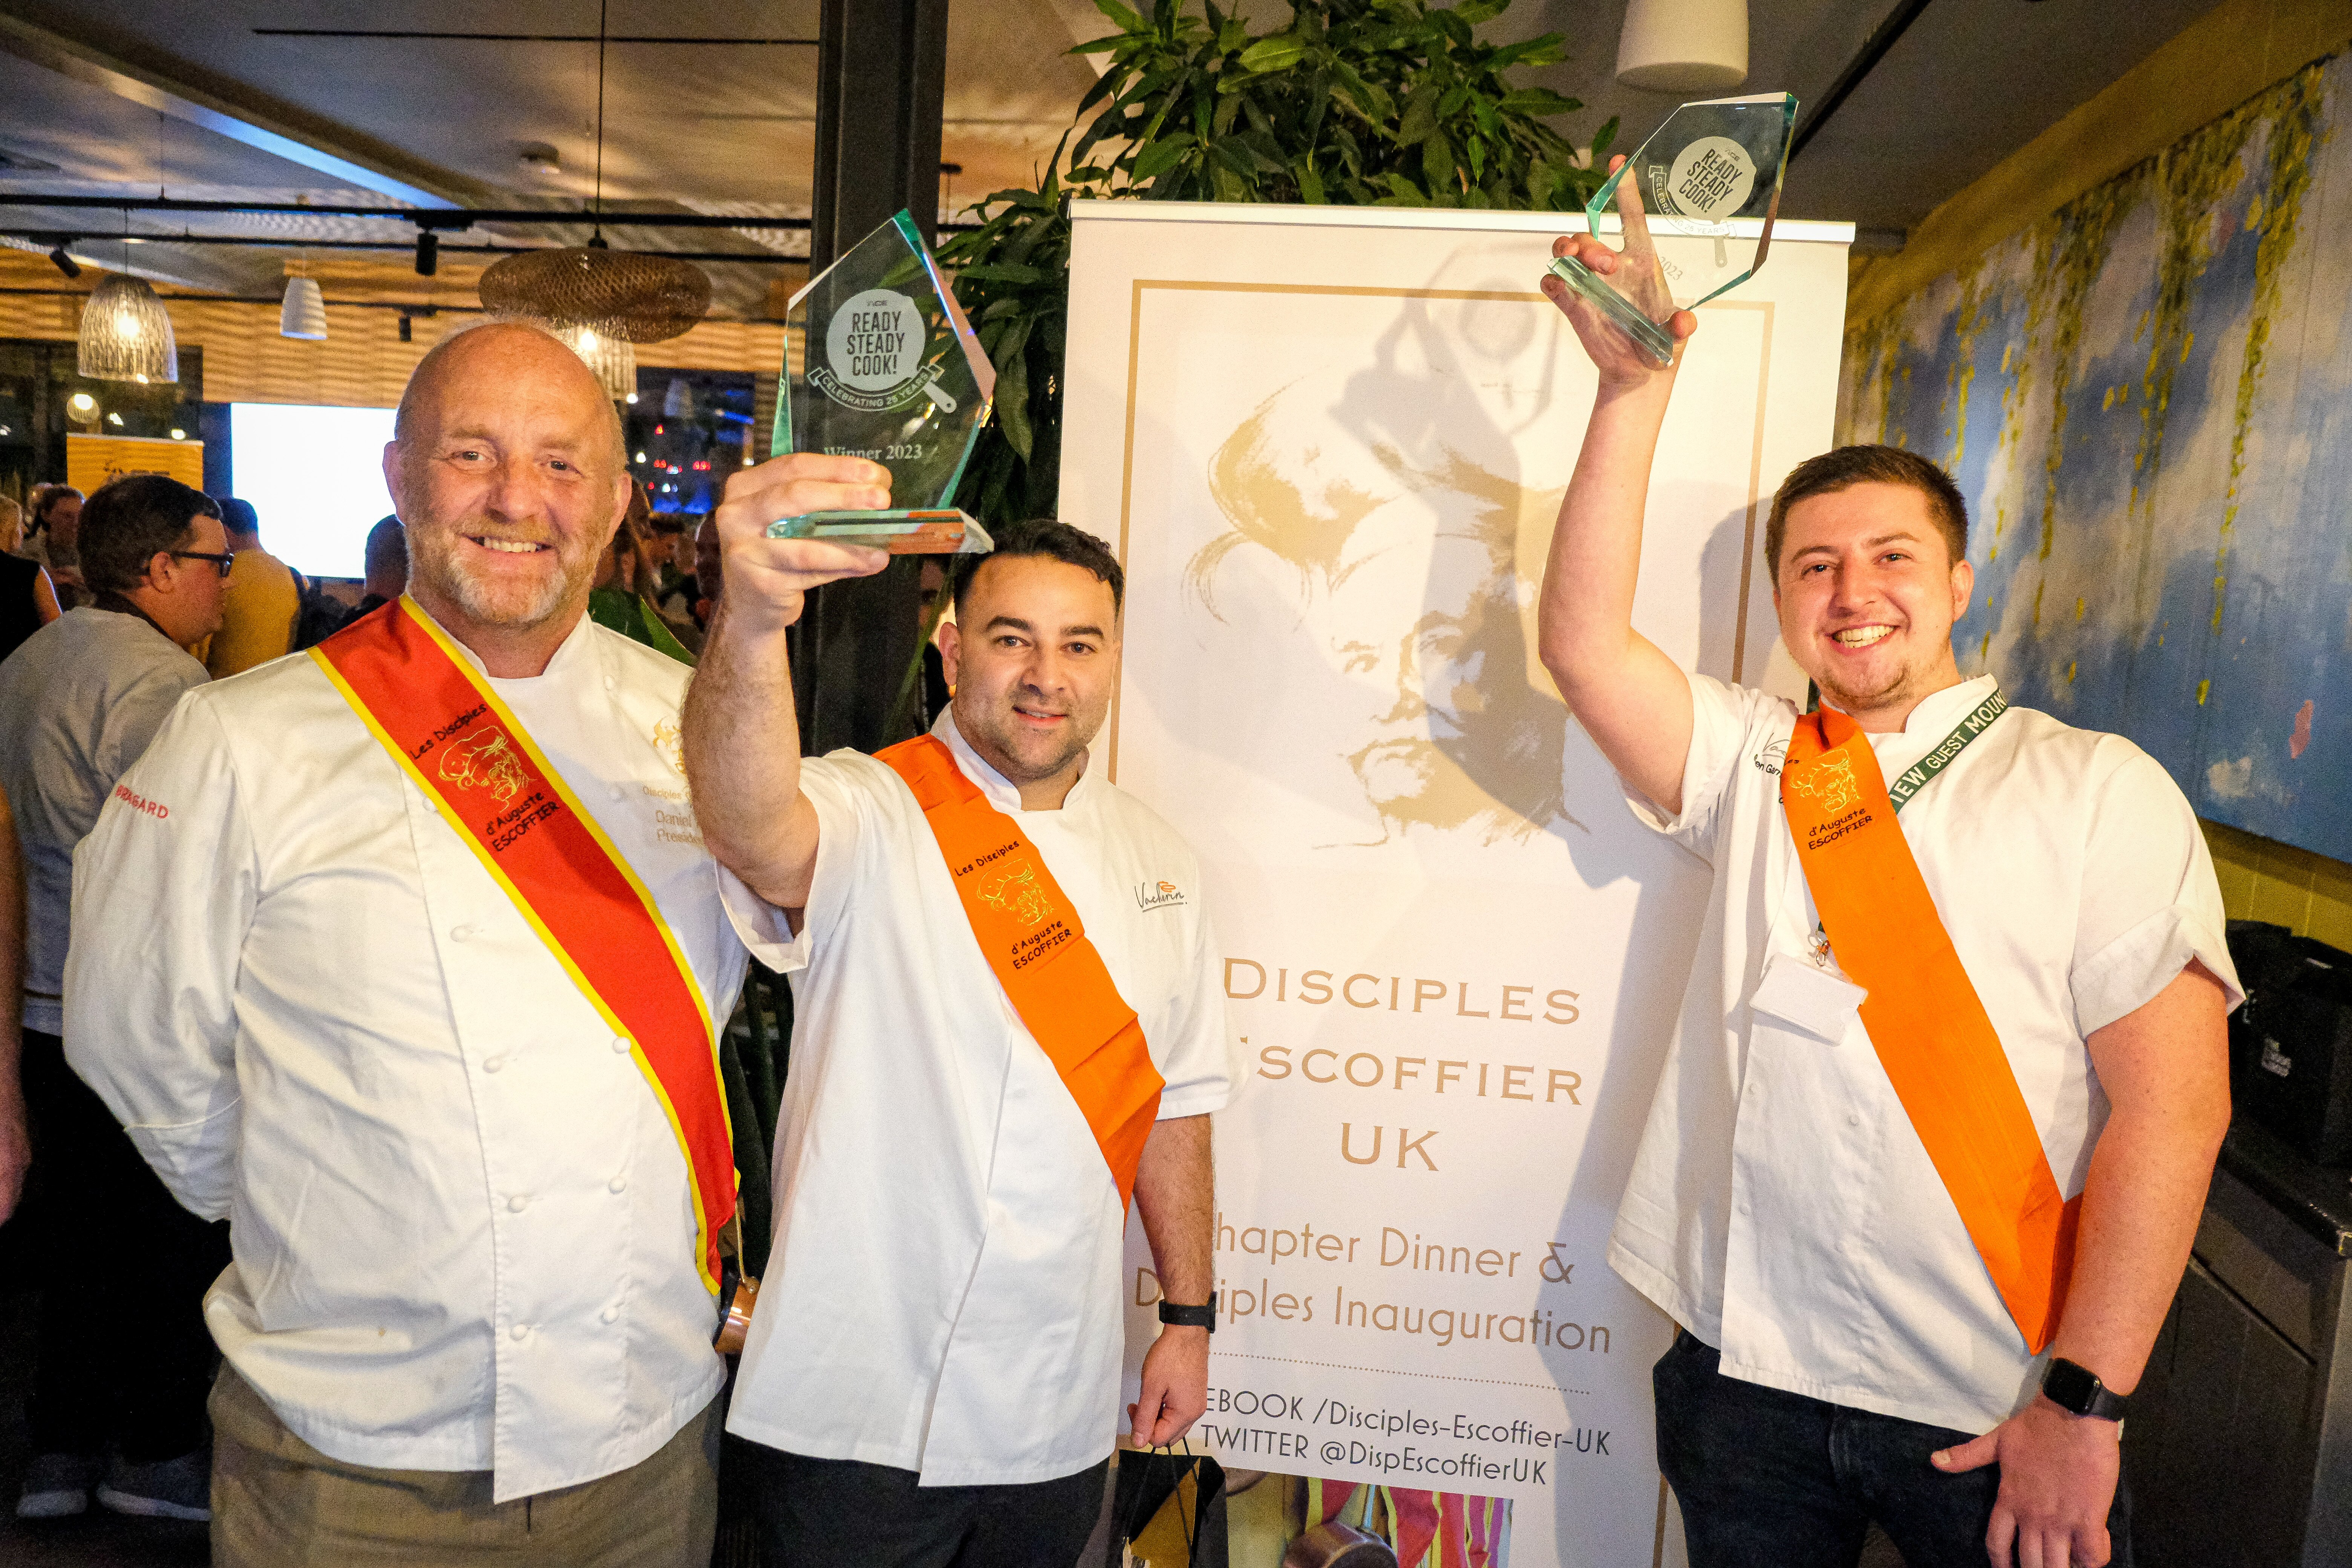 Vacherin named champions of ACE’s Ready Steady Cook competition